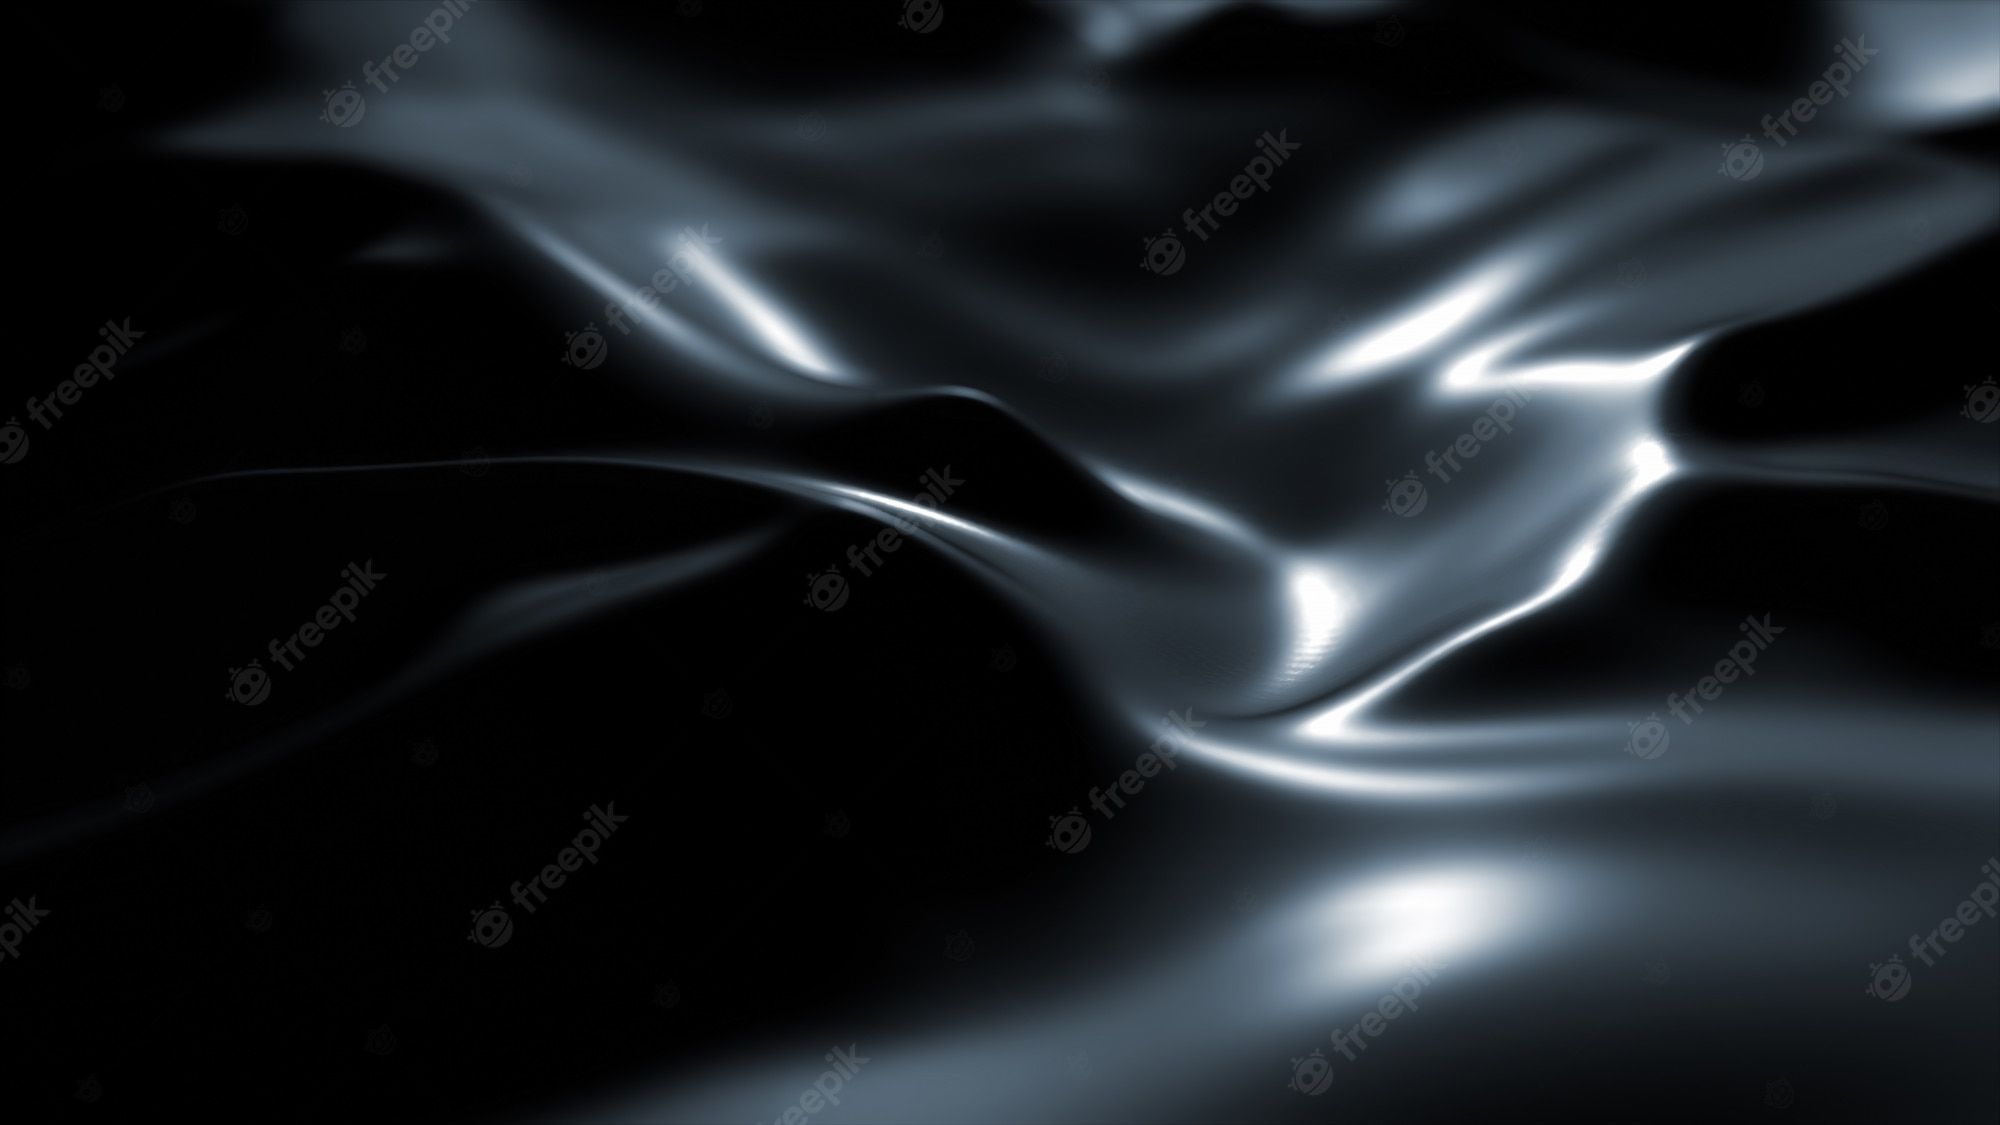 Free Photo. Dark surface with reflections. smooth minimal black waves background. blurry silk waves. minimal soft grayscale ripples flow